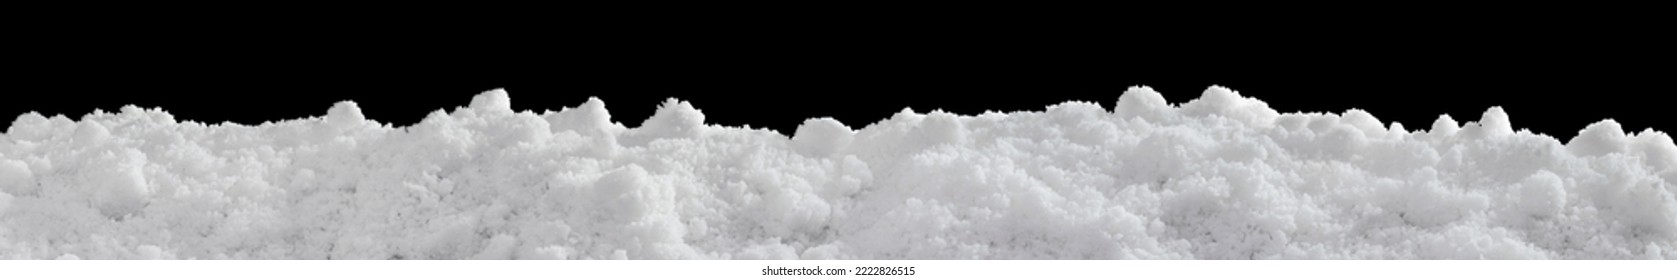 Banner of rough white snow isolated on black